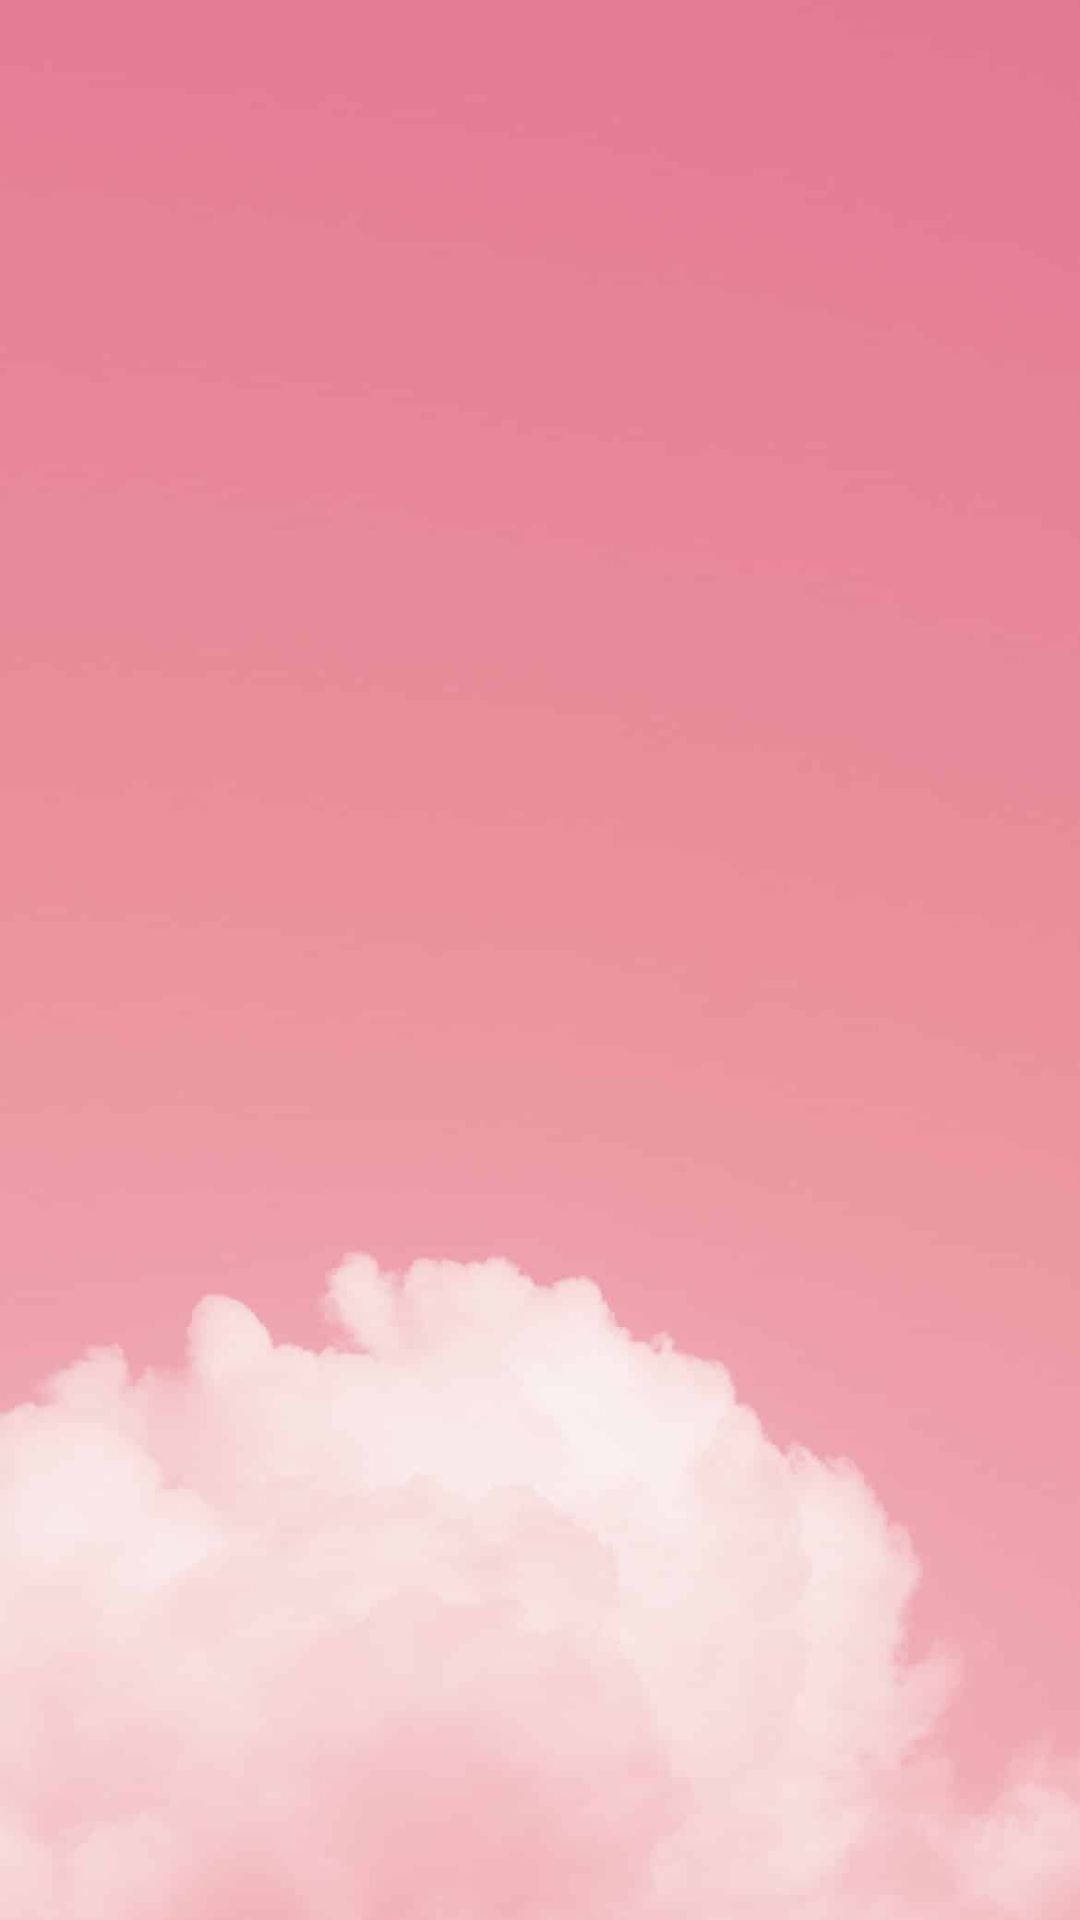 Aesthetic Pink Sky With A Cloud Wallpaper